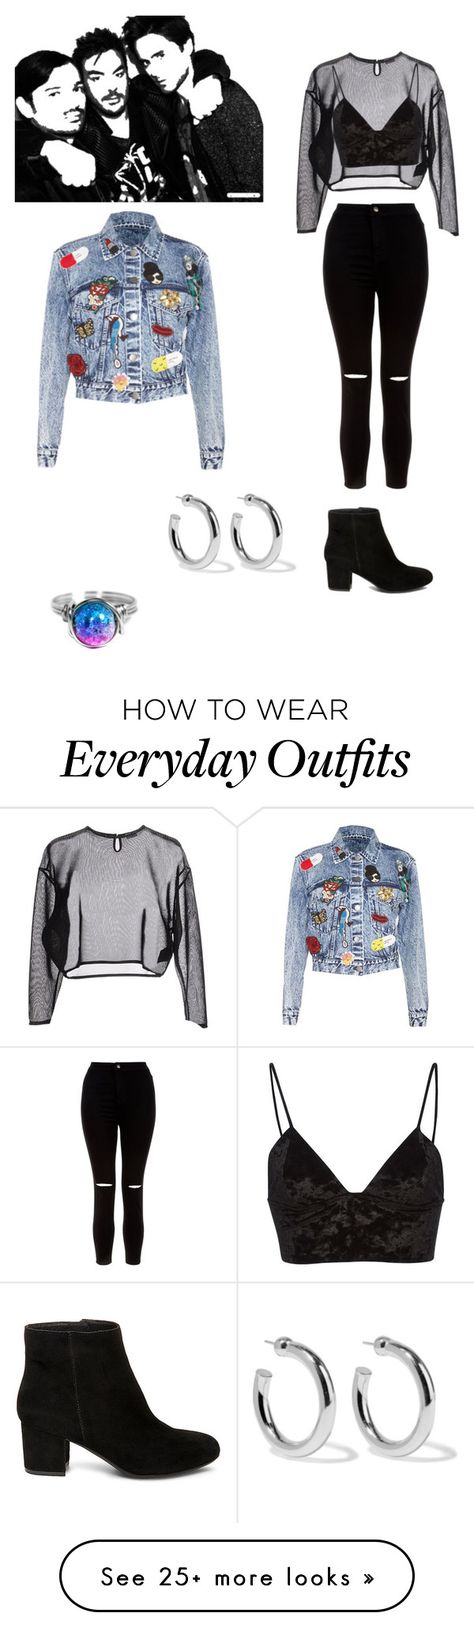 "My 30 seconds to Mars inspired concert outfit" by aaliyah-lopez-ceballos on Polyvore featuring Yves Saint Laurent, Fleur du Mal, New Look, Steve Madden, Alice + Olivia and Sophie Buhai 30 Seconds To Mars Concert Outfit, Sophie Buhai, 30 Seconds To Mars, Weekend Style, Aaliyah, 30 Seconds, Concert Outfit, Alice Olivia, Everyday Outfits